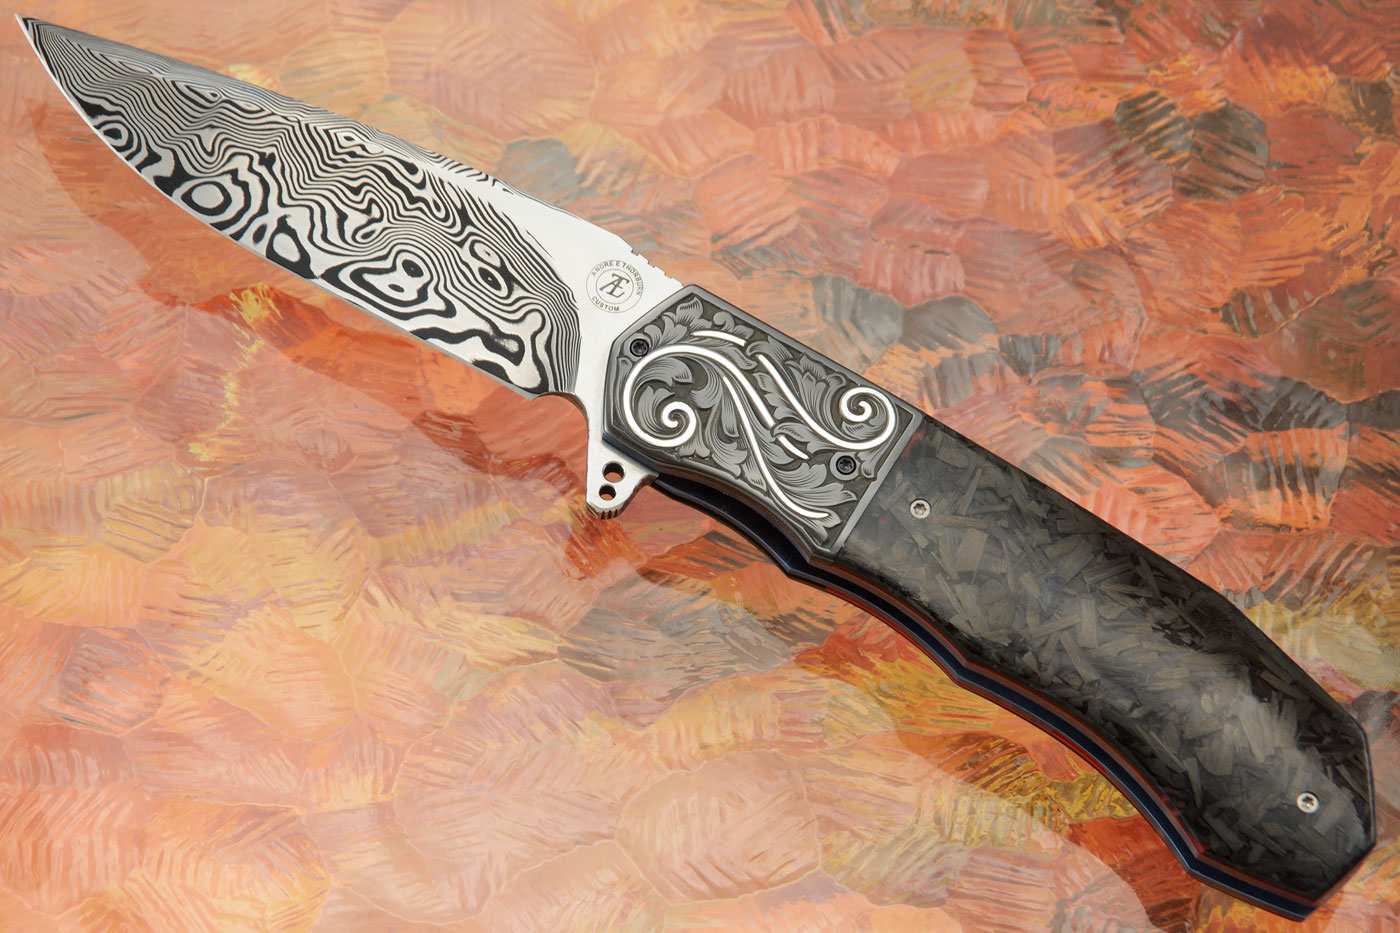 L44 Compact Flipper with Shred Carbon Fiber, Damascus, and Engraved Zirconium with Silver Inlays (Ceramic IKBS)